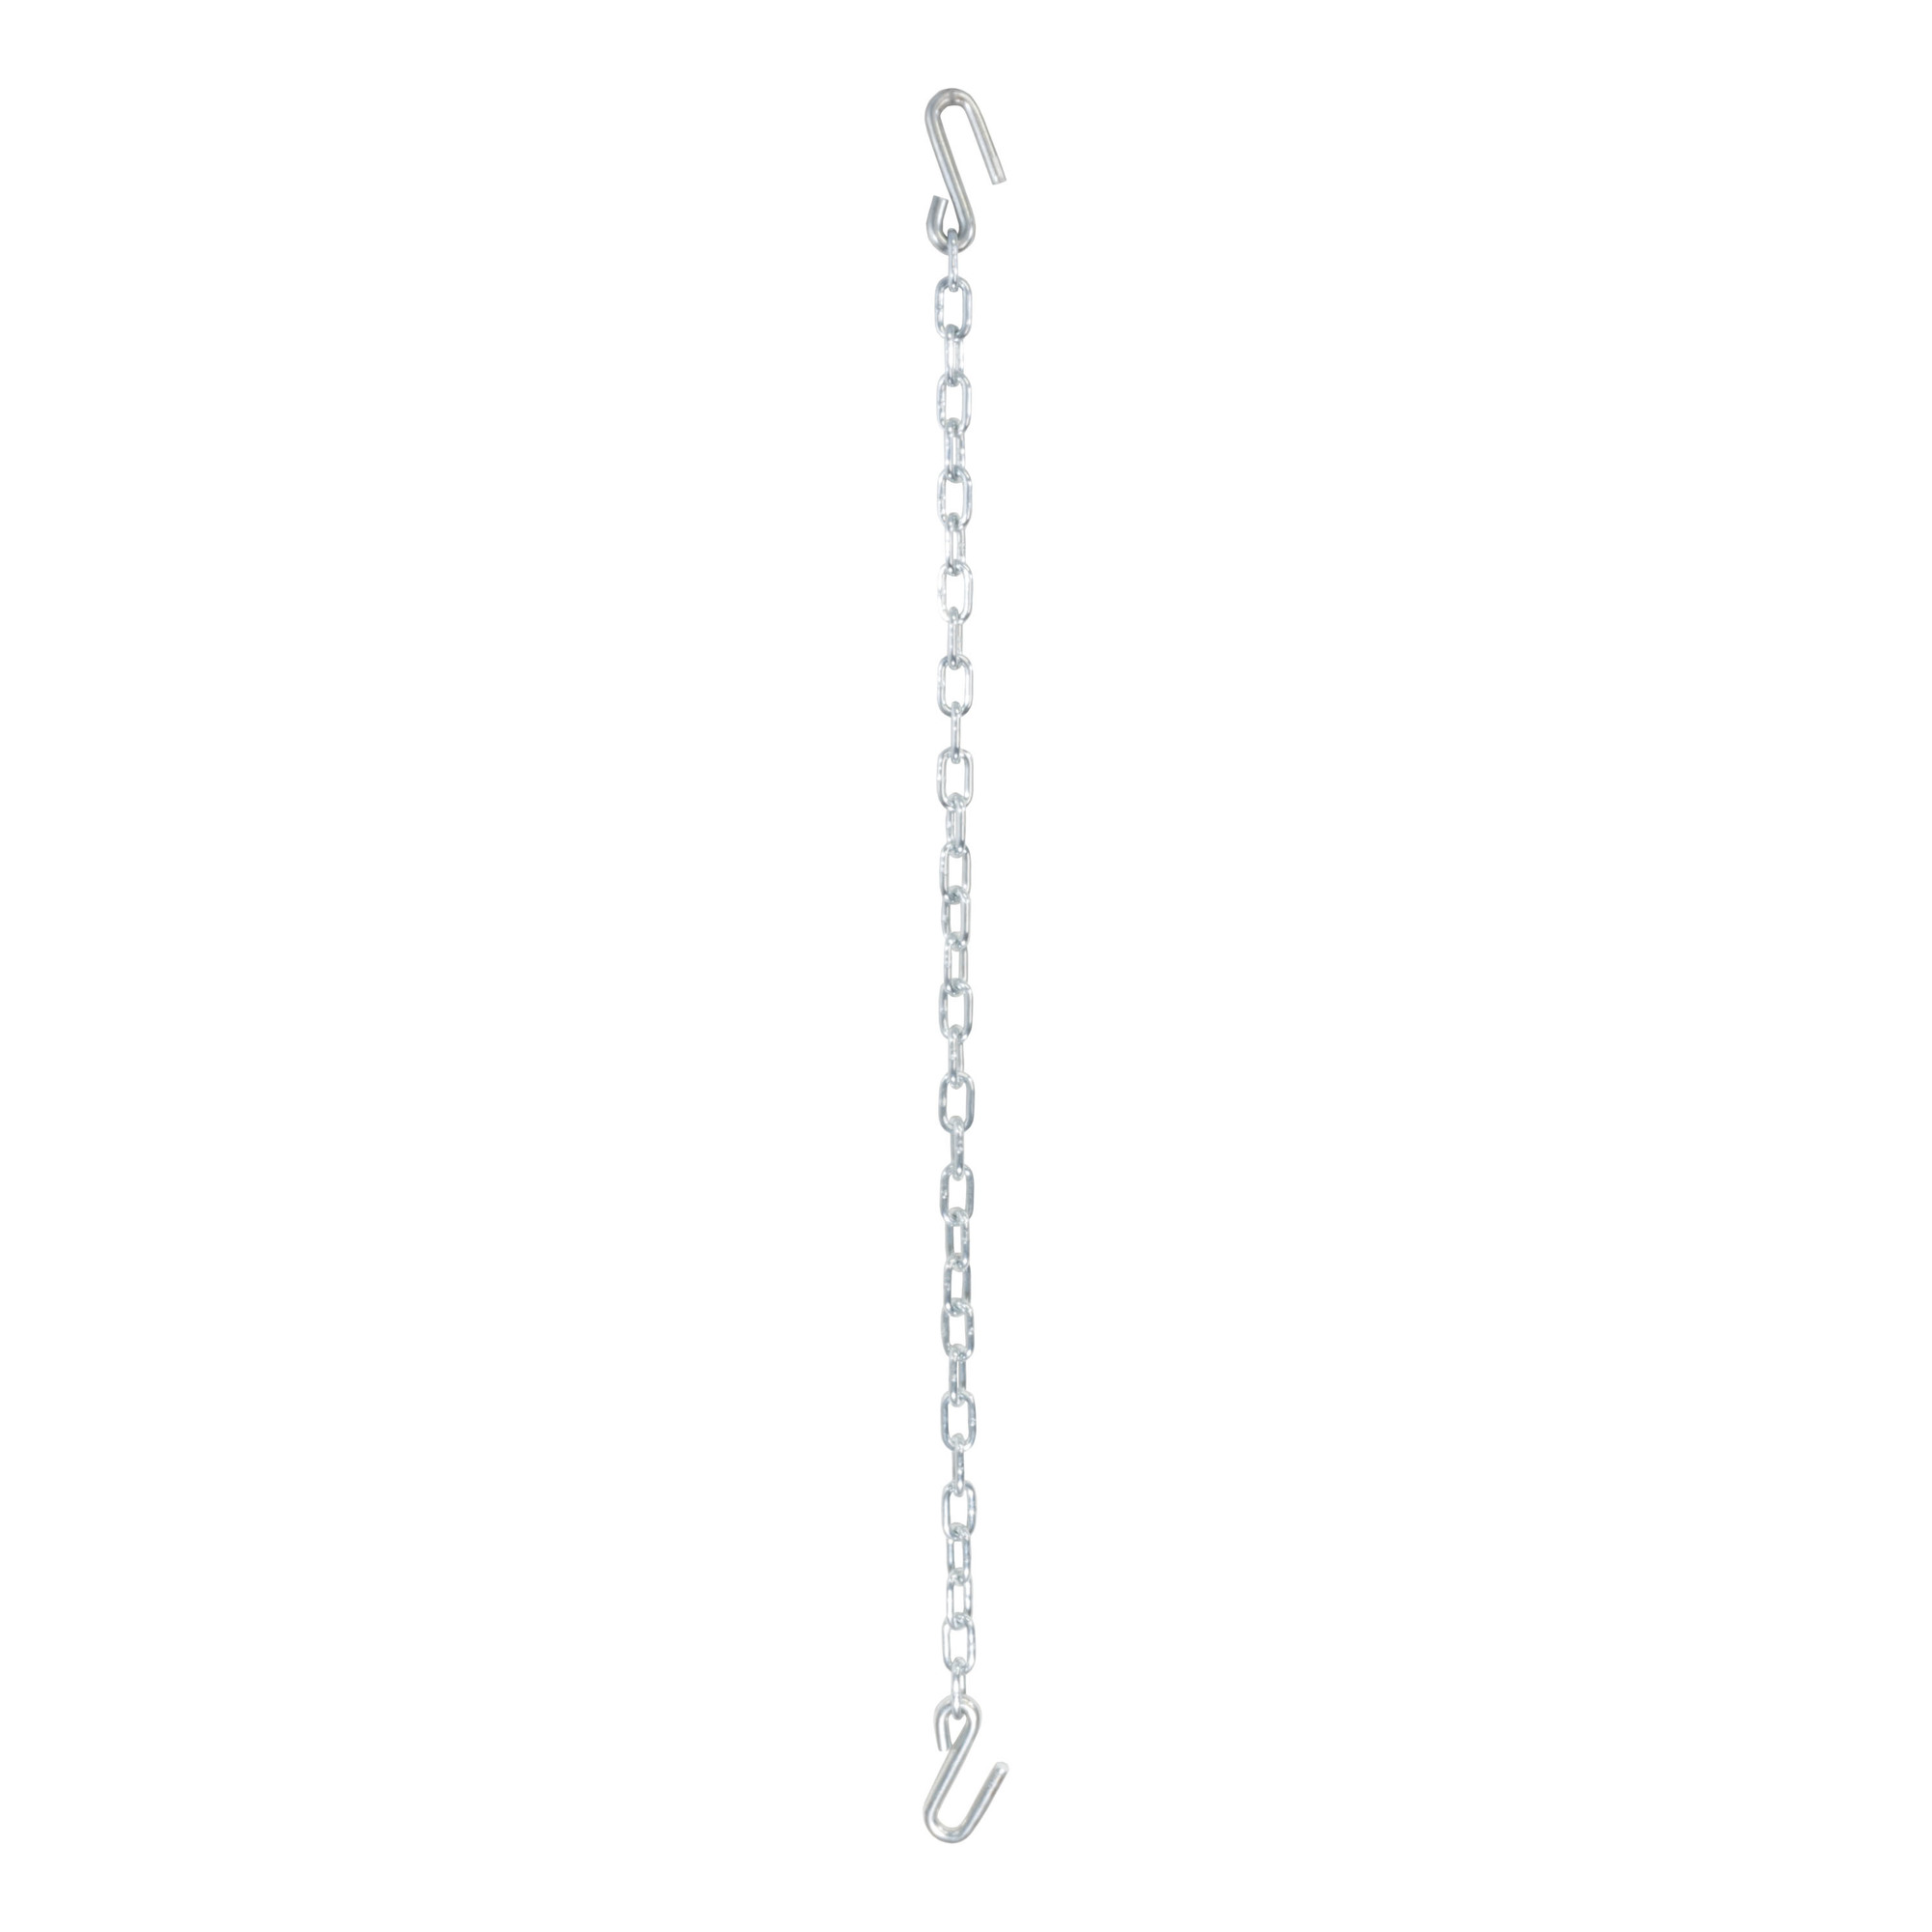 Curt Manufacturing, 48Inch Safety Chain with 2 S-Hooks, Length 48 in, Material Steel, Model 80031